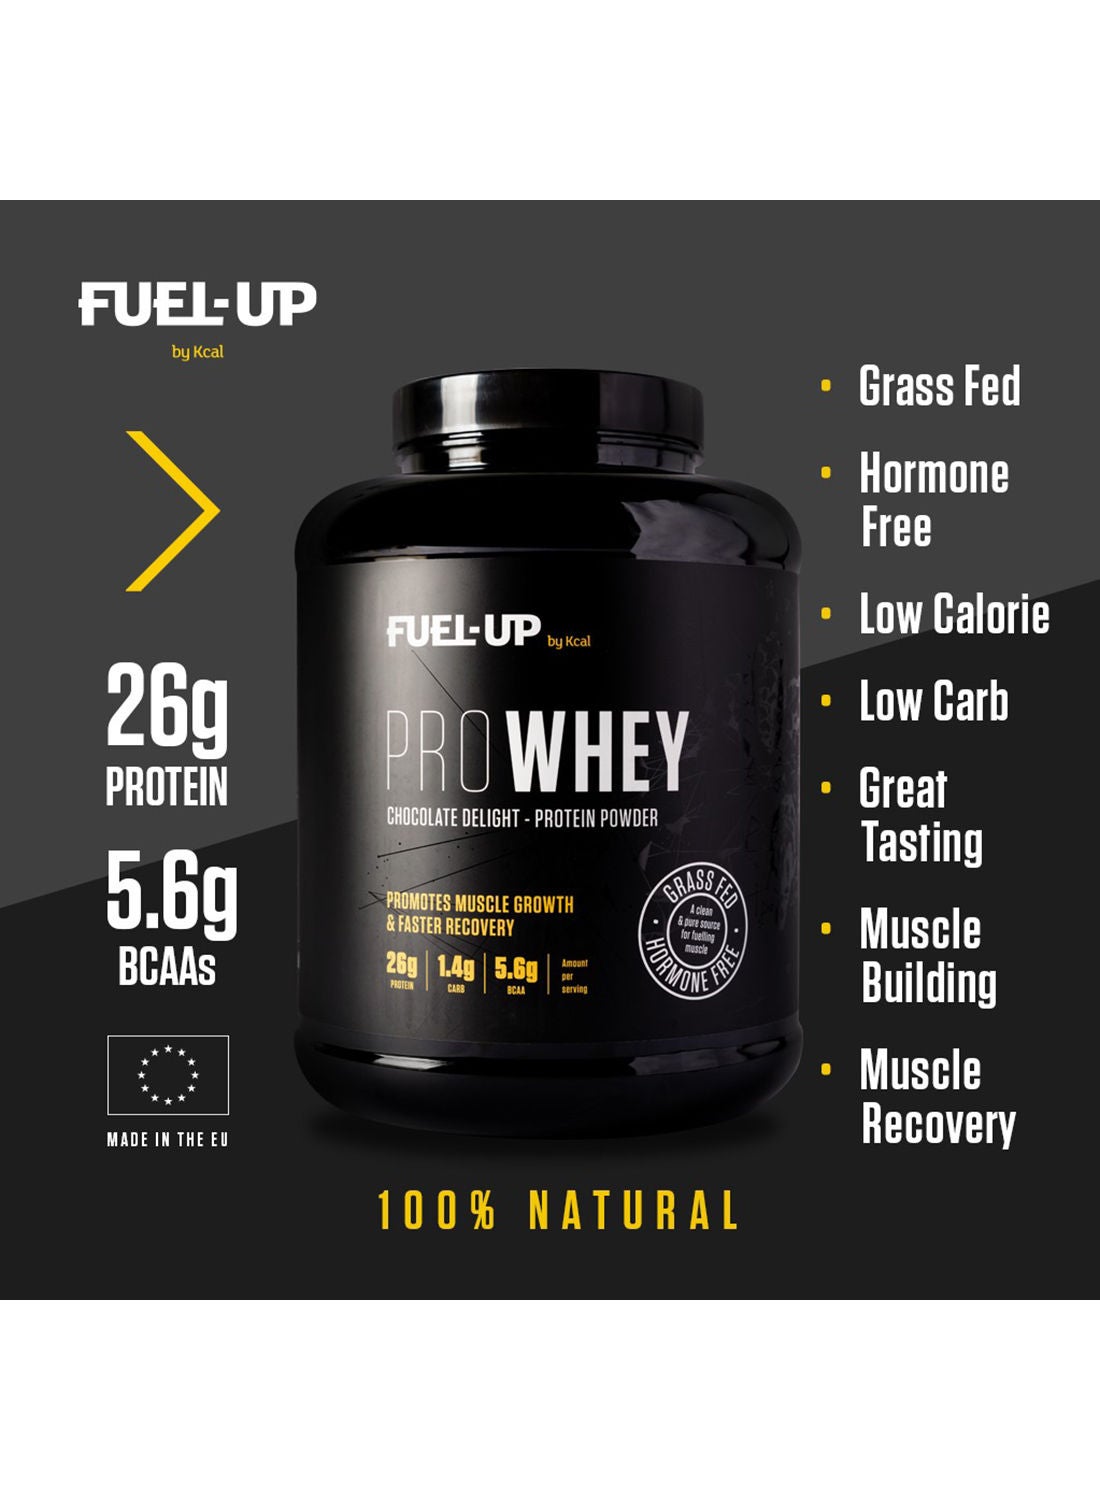 PROWHEY - Grass Fed and Hormone Free Whey Protein - 26g of protein per serving - Chocolate Delight - 5lb 